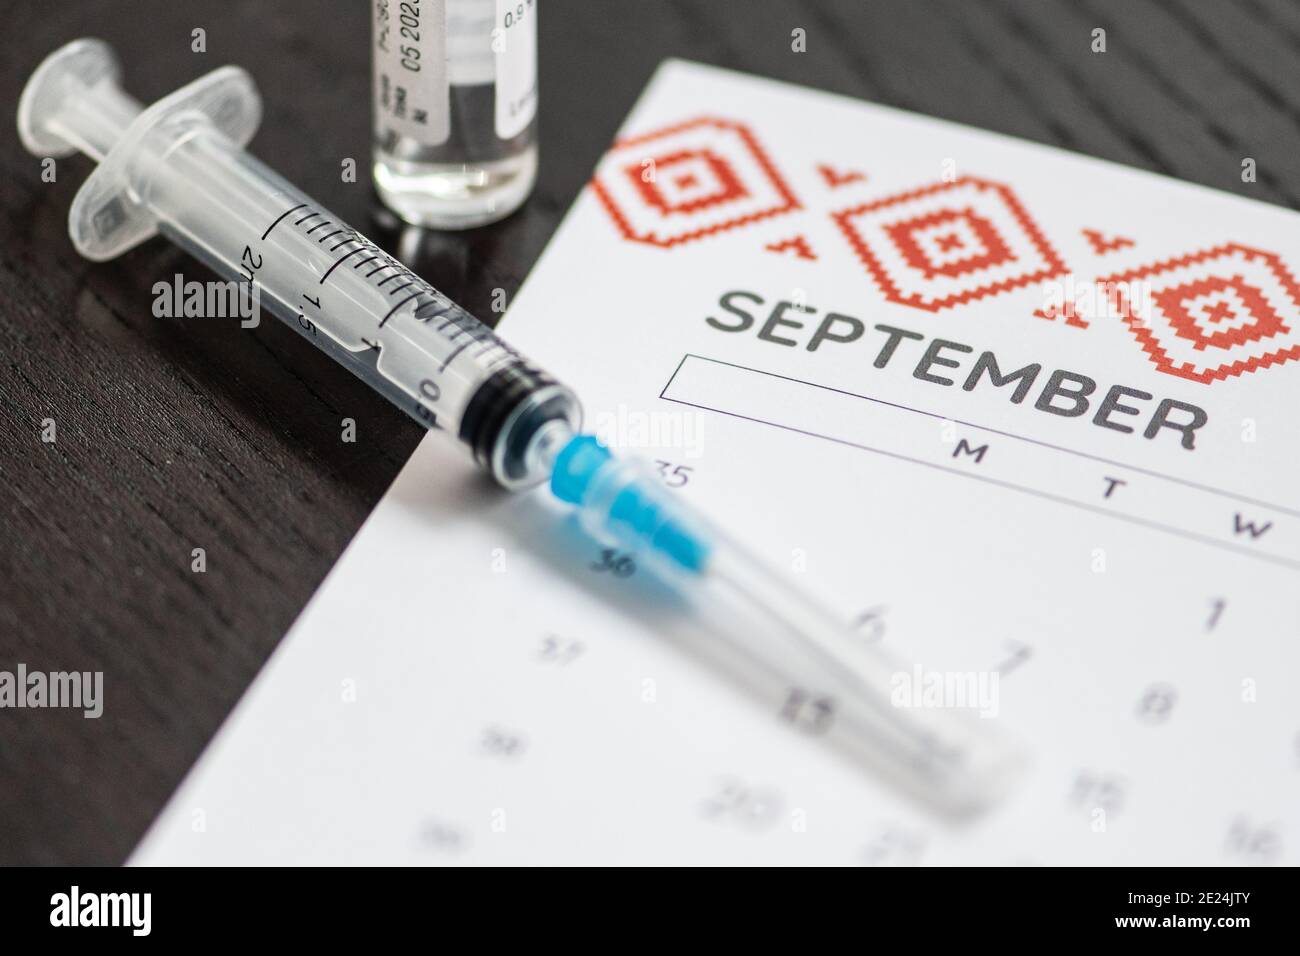 Syringe, vial and calendar with month of September on a black table ready to be used. Covid or Coronavirus vaccine background Stock Photo